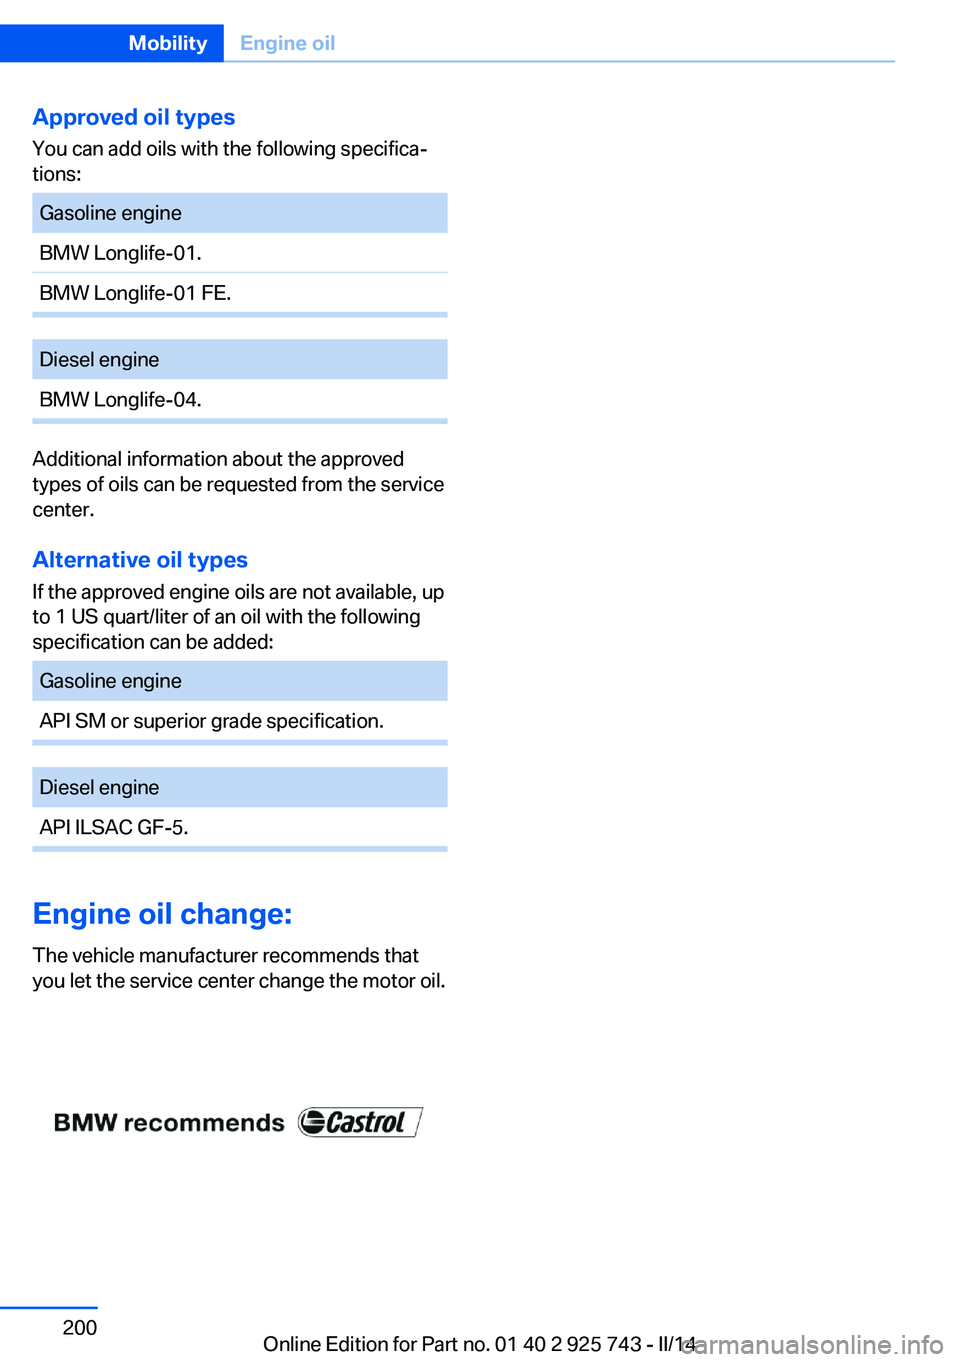 BMW 320I XDRIVE 2014  Owners Manual Approved oil typesYou can add oils with the following specifica‐
tions:Gasoline engineBMW Longlife-01.BMW Longlife-01 FE.Diesel engineBMW Longlife-04.
Additional information about the approved
types